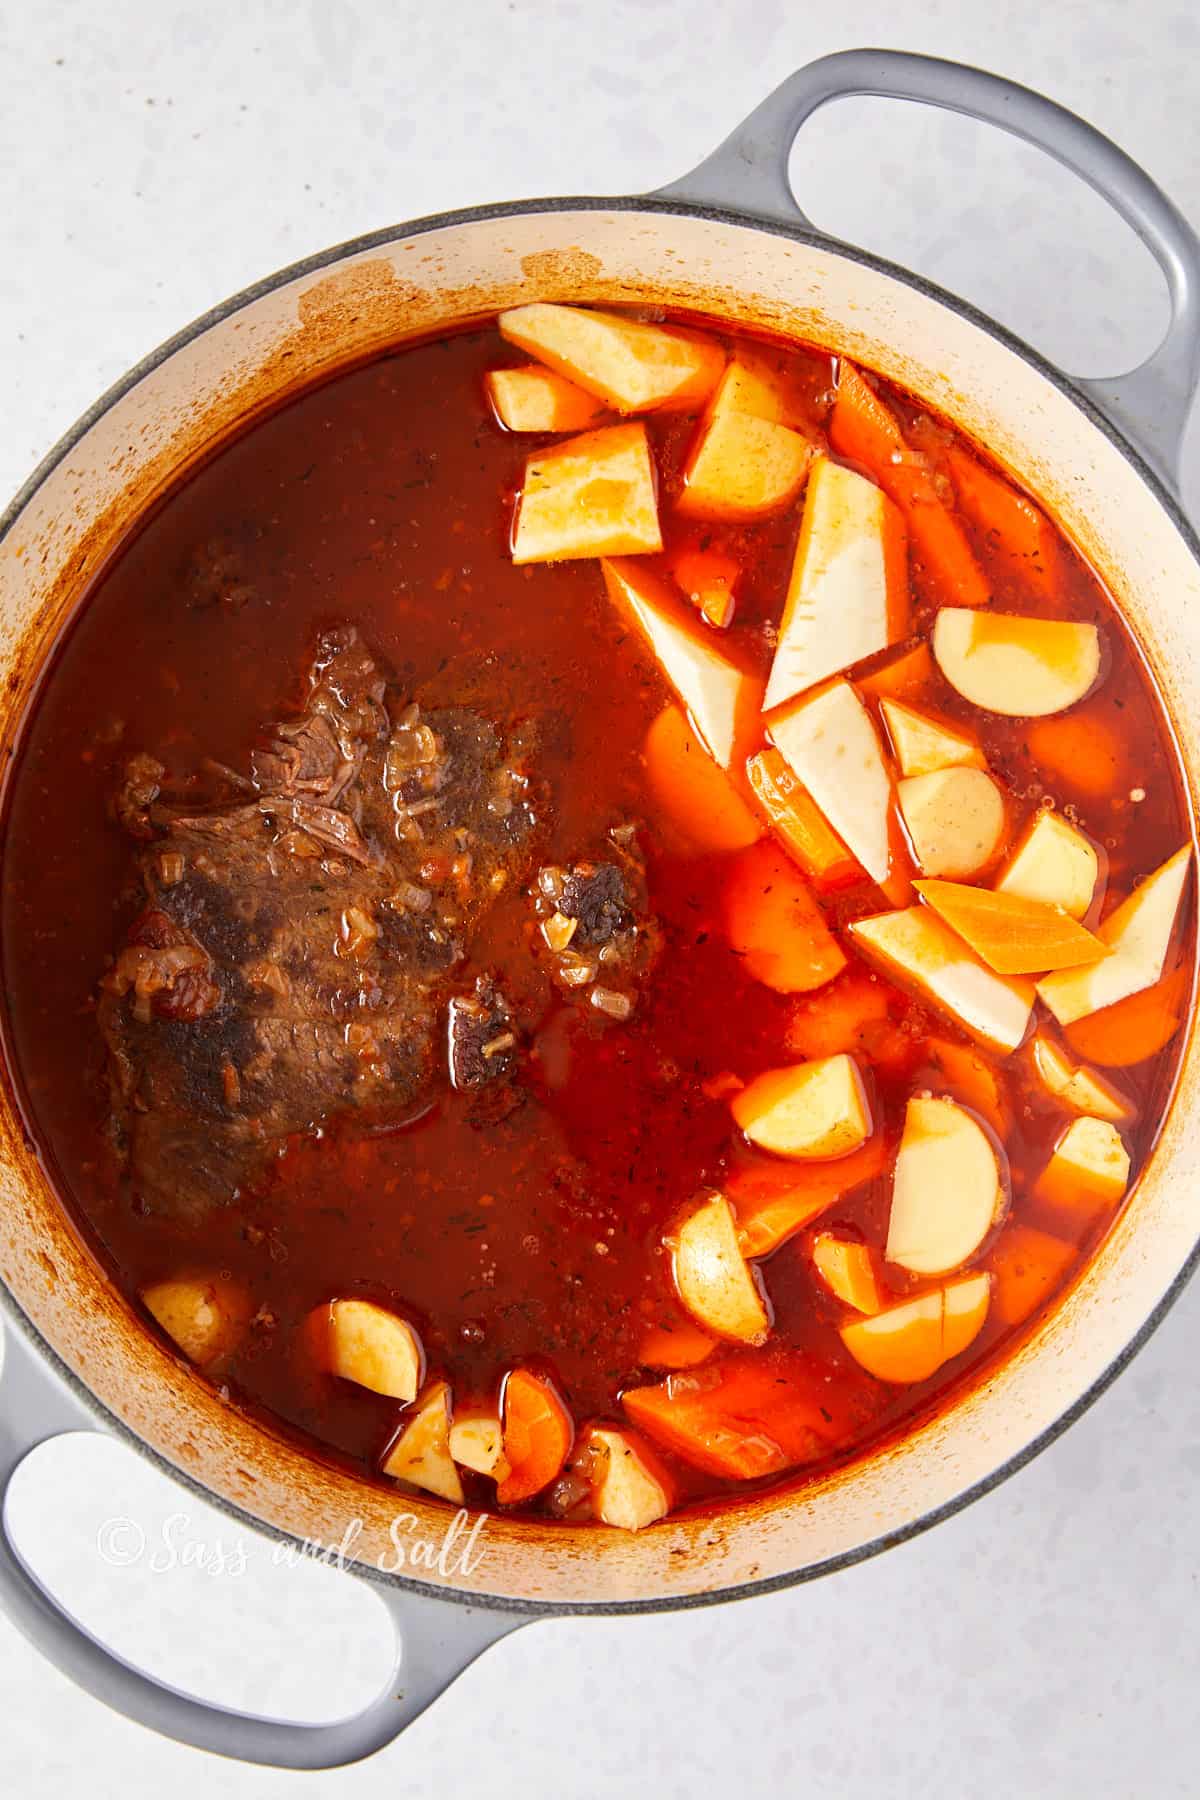 The image is an overhead view of a Dutch oven containing a hearty beef stew. The stew features a large piece of browned chuck roast surrounded by a rich, reddish-brown broth. Added to the stew are chunks of carrots and quartered potatoes, which are starting to cook in the flavorful liquid. The colors are vibrant, with the orange of the carrots and the cream of the potatoes standing out against the deep shade of the broth. The Dutch oven is on a light, speckled background, and "Sass and Salt" is watermarked onto the image.